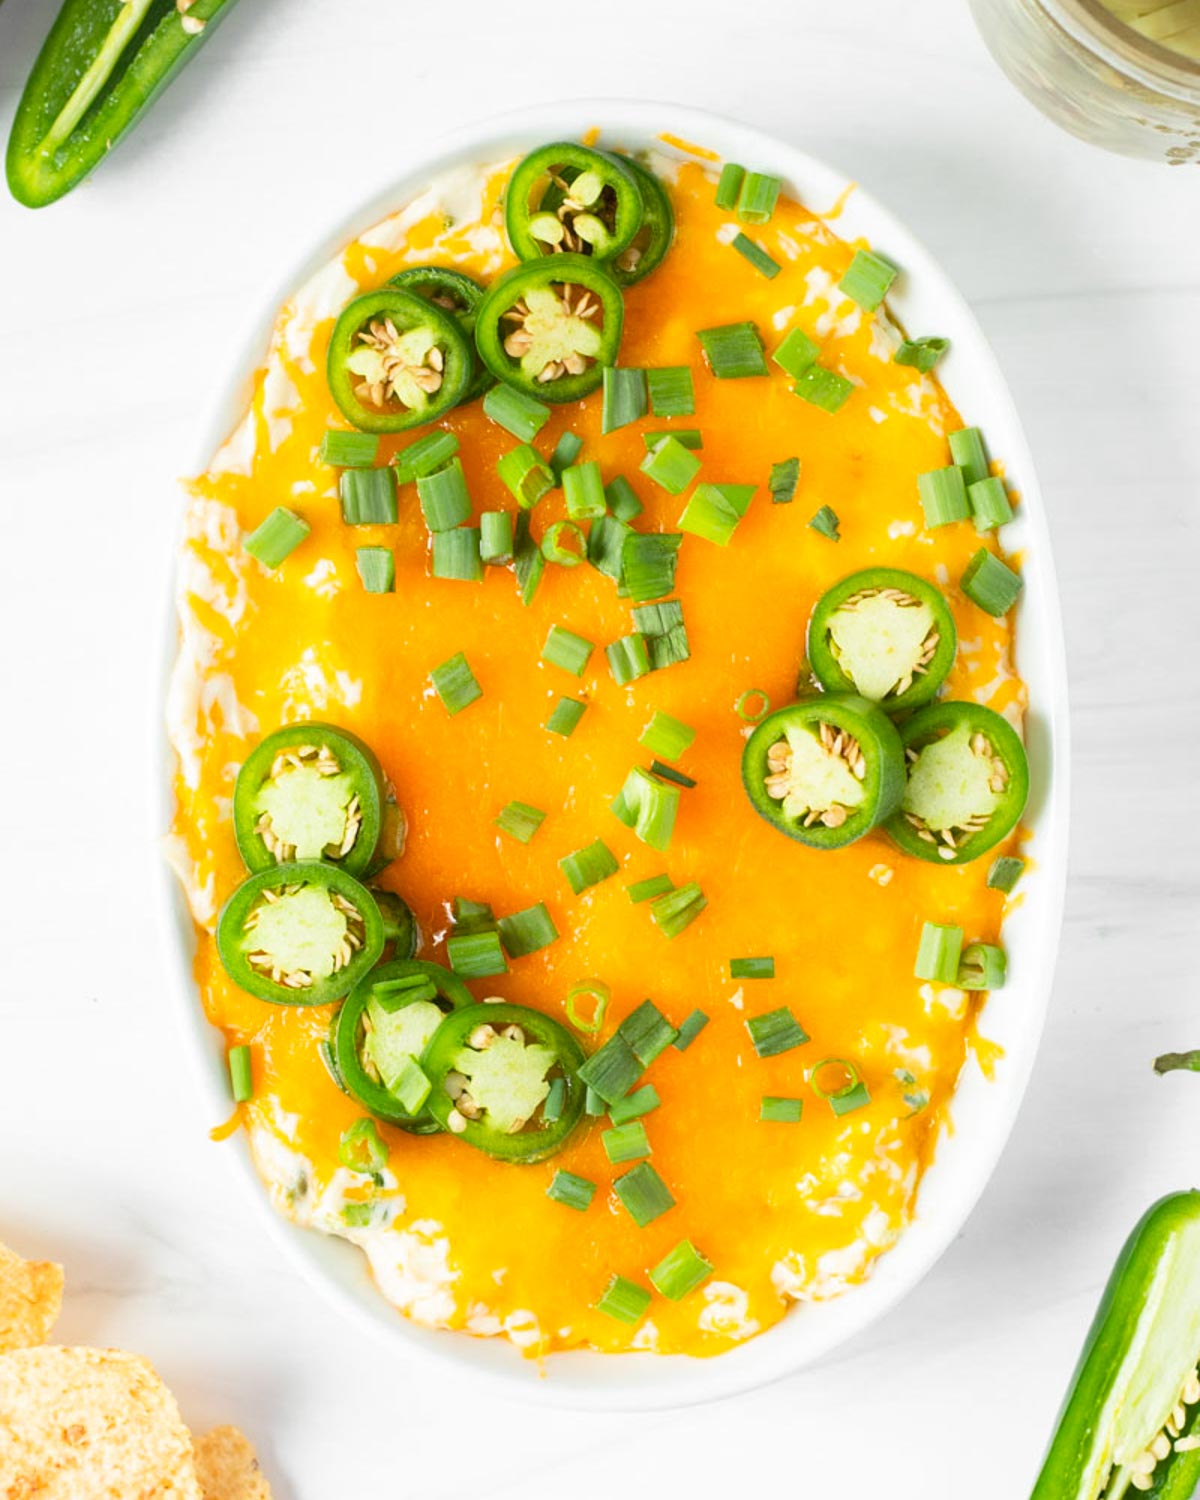 This jalapeno popper dip is a great game day appetizer and one of our favorite Super Bowl Sunday appetizer recipes. Made with classic jalapeno popper ingredients, this easy dip recipe is ready in 15-minutes for a quick and easy crowd-pleaser appetizer.